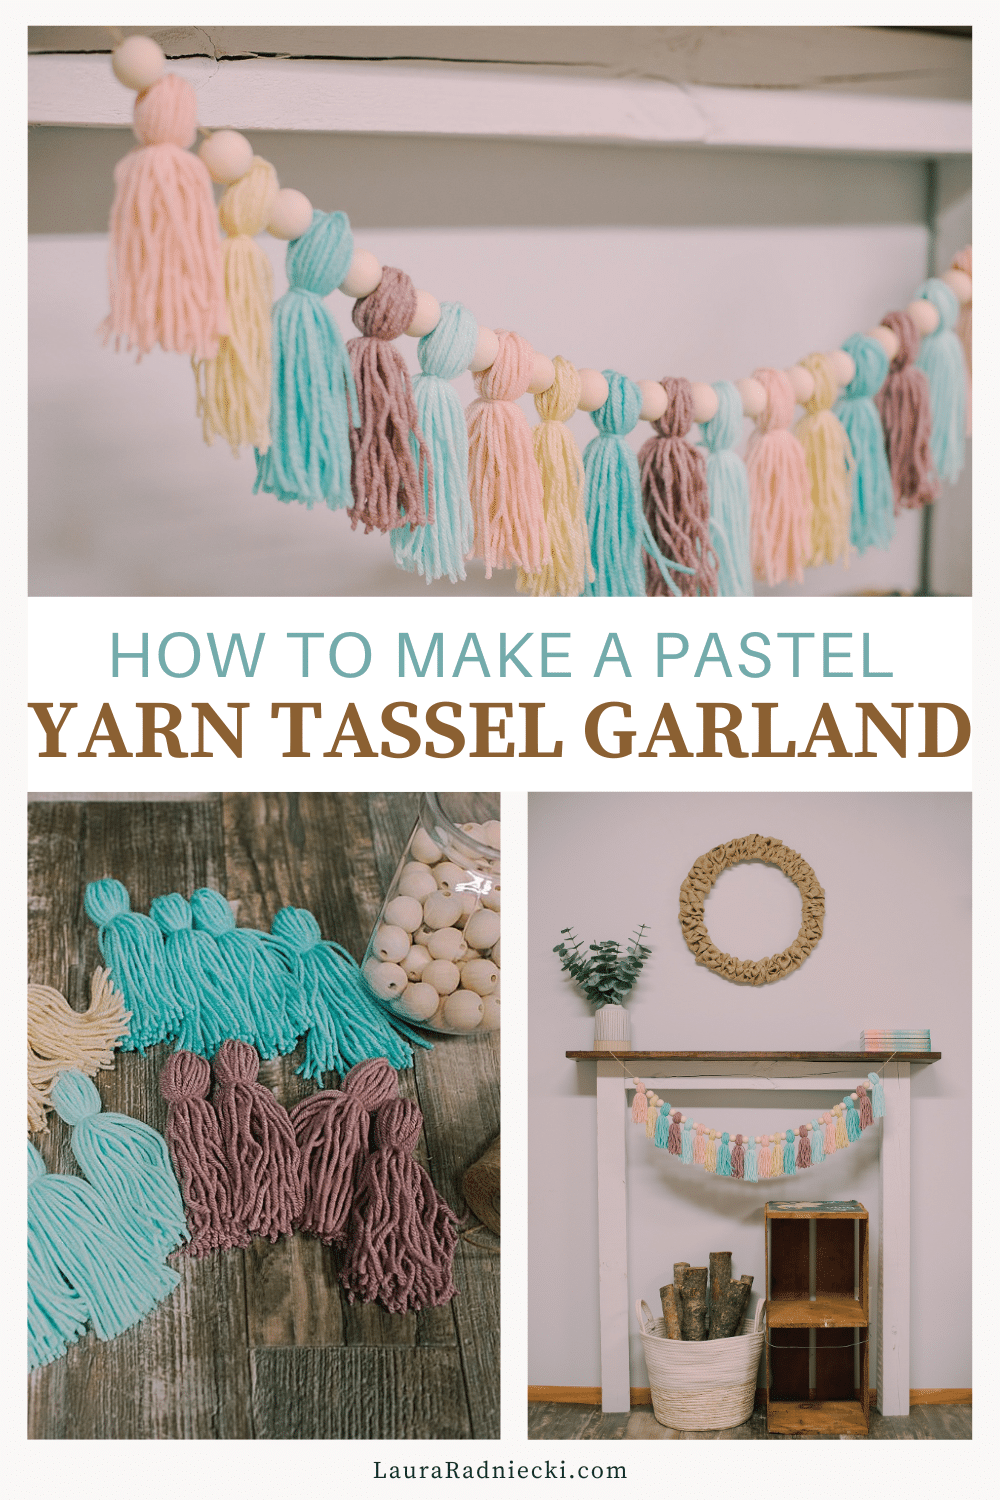 How to Make a Pastel-Colored Yarn Tassel Garland using yarn that is pastel colors for spring or summer.